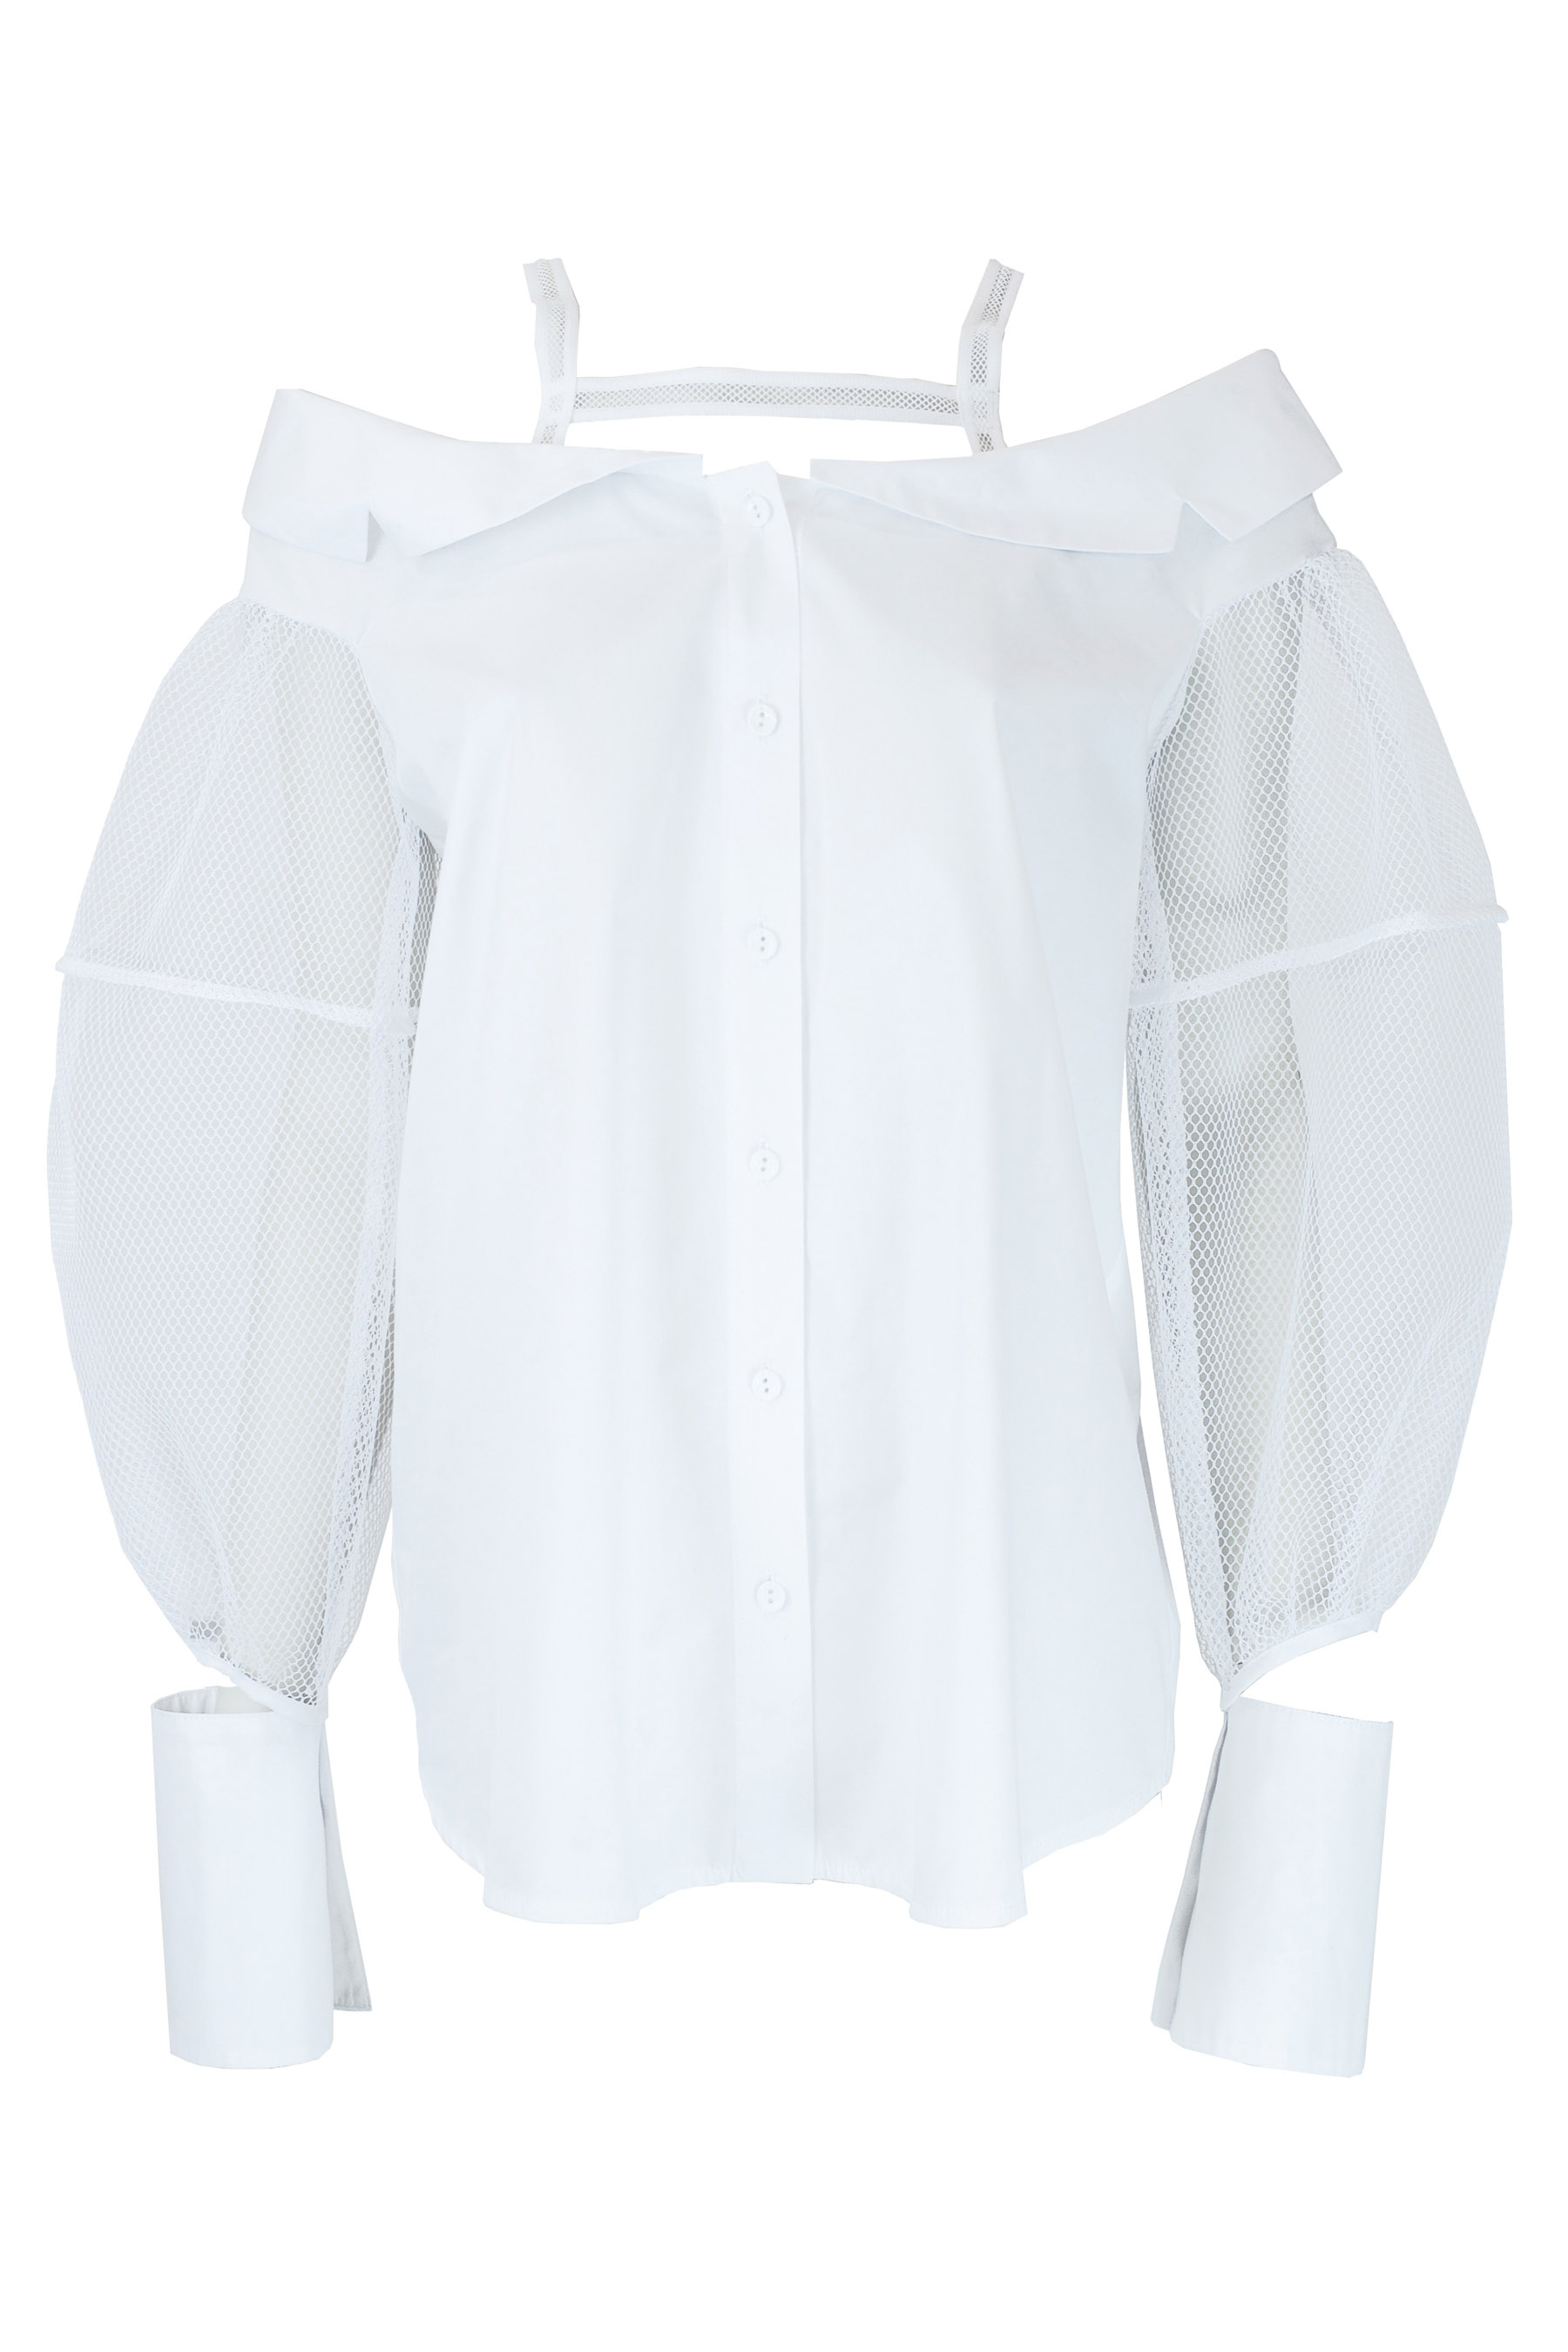 Blouse without shoulders white mesh sleeve